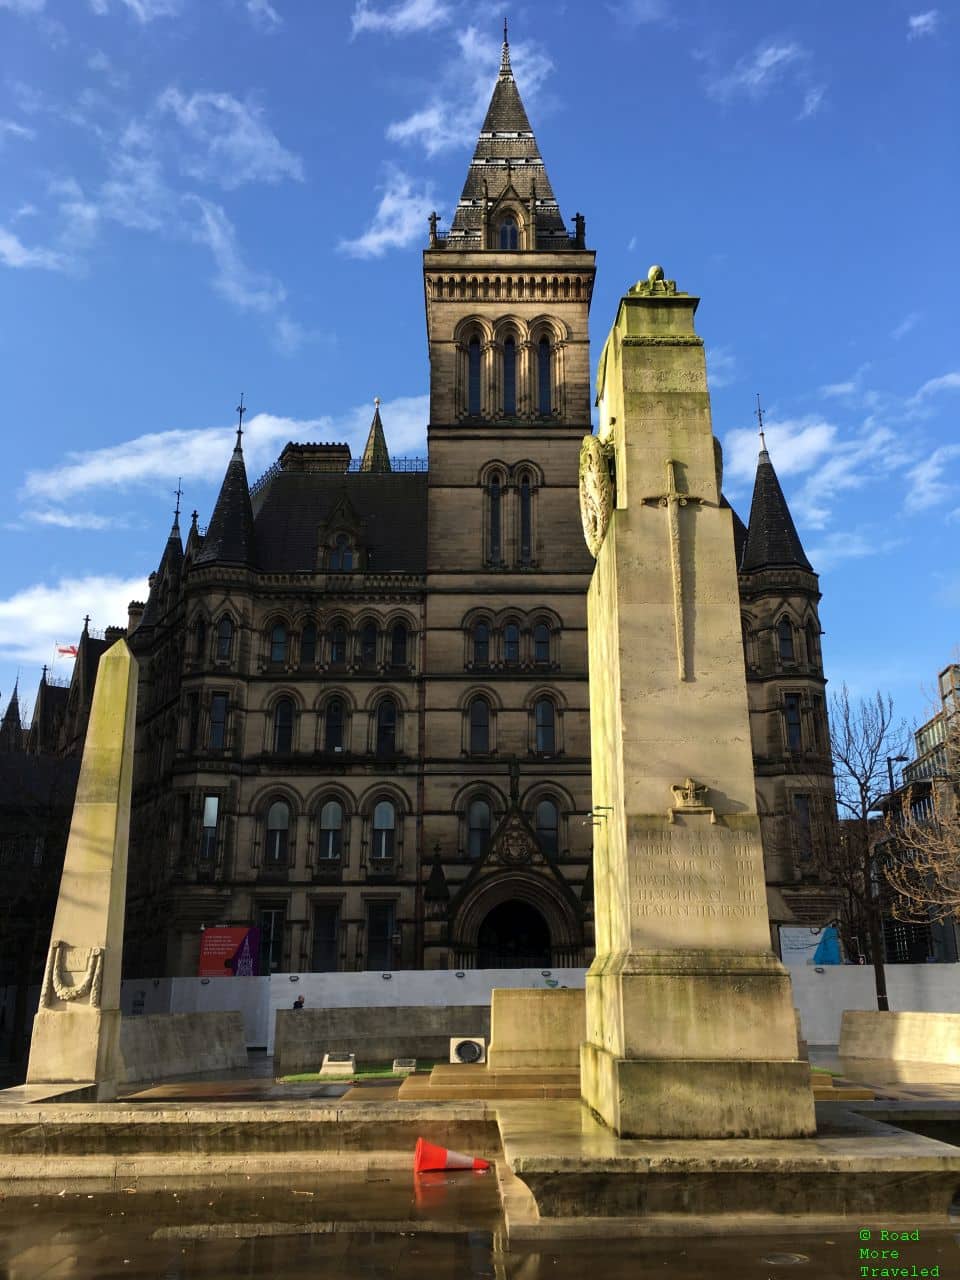 Sunday roasting and more in Manchester - Manchester Town Hall and Cenotaph